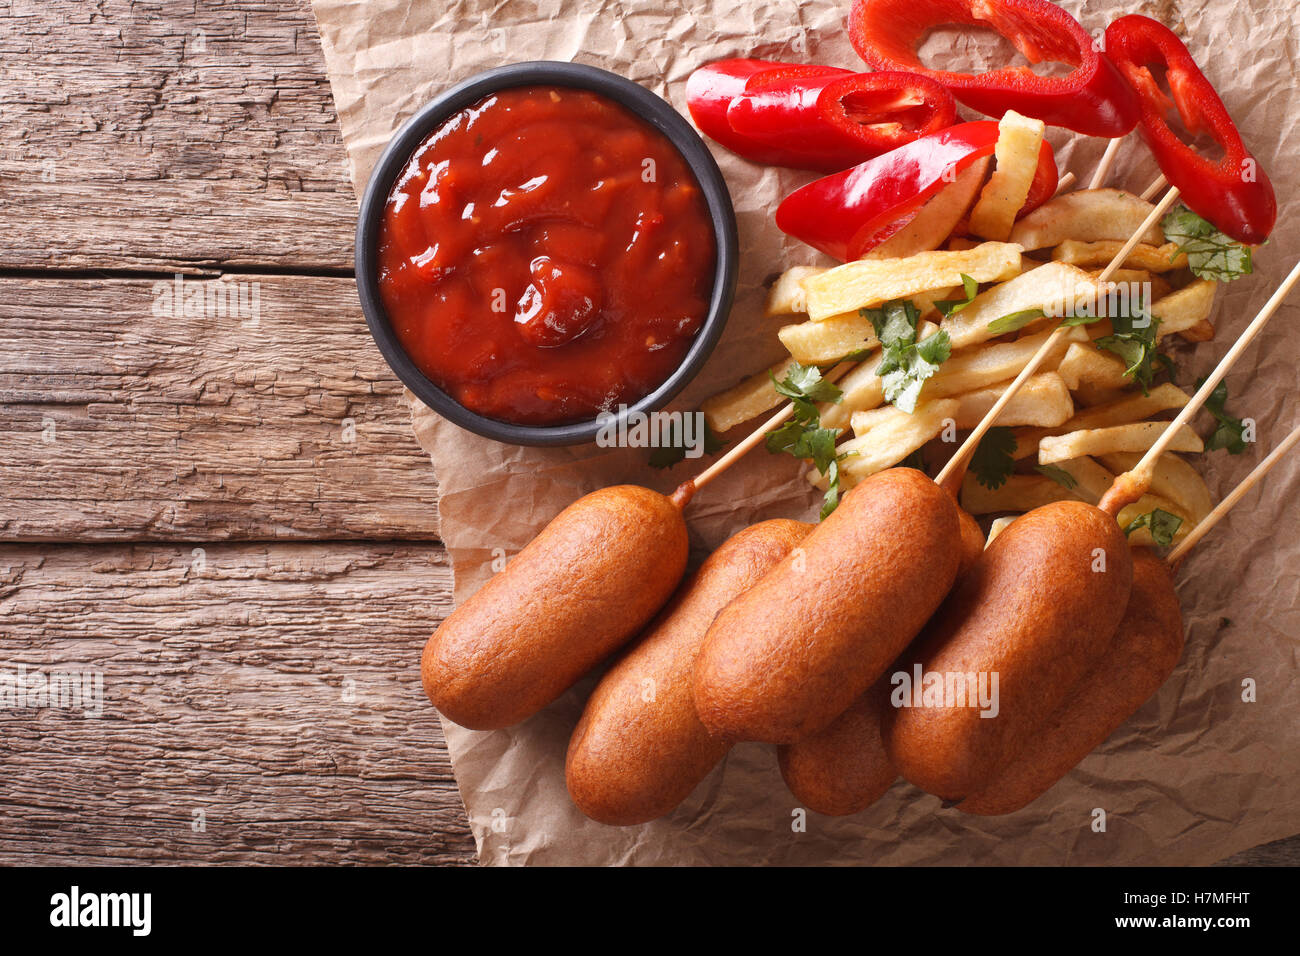 Corn dogs, french fries, pepper and ketchup on the table. Horizontal view from above Stock Photo